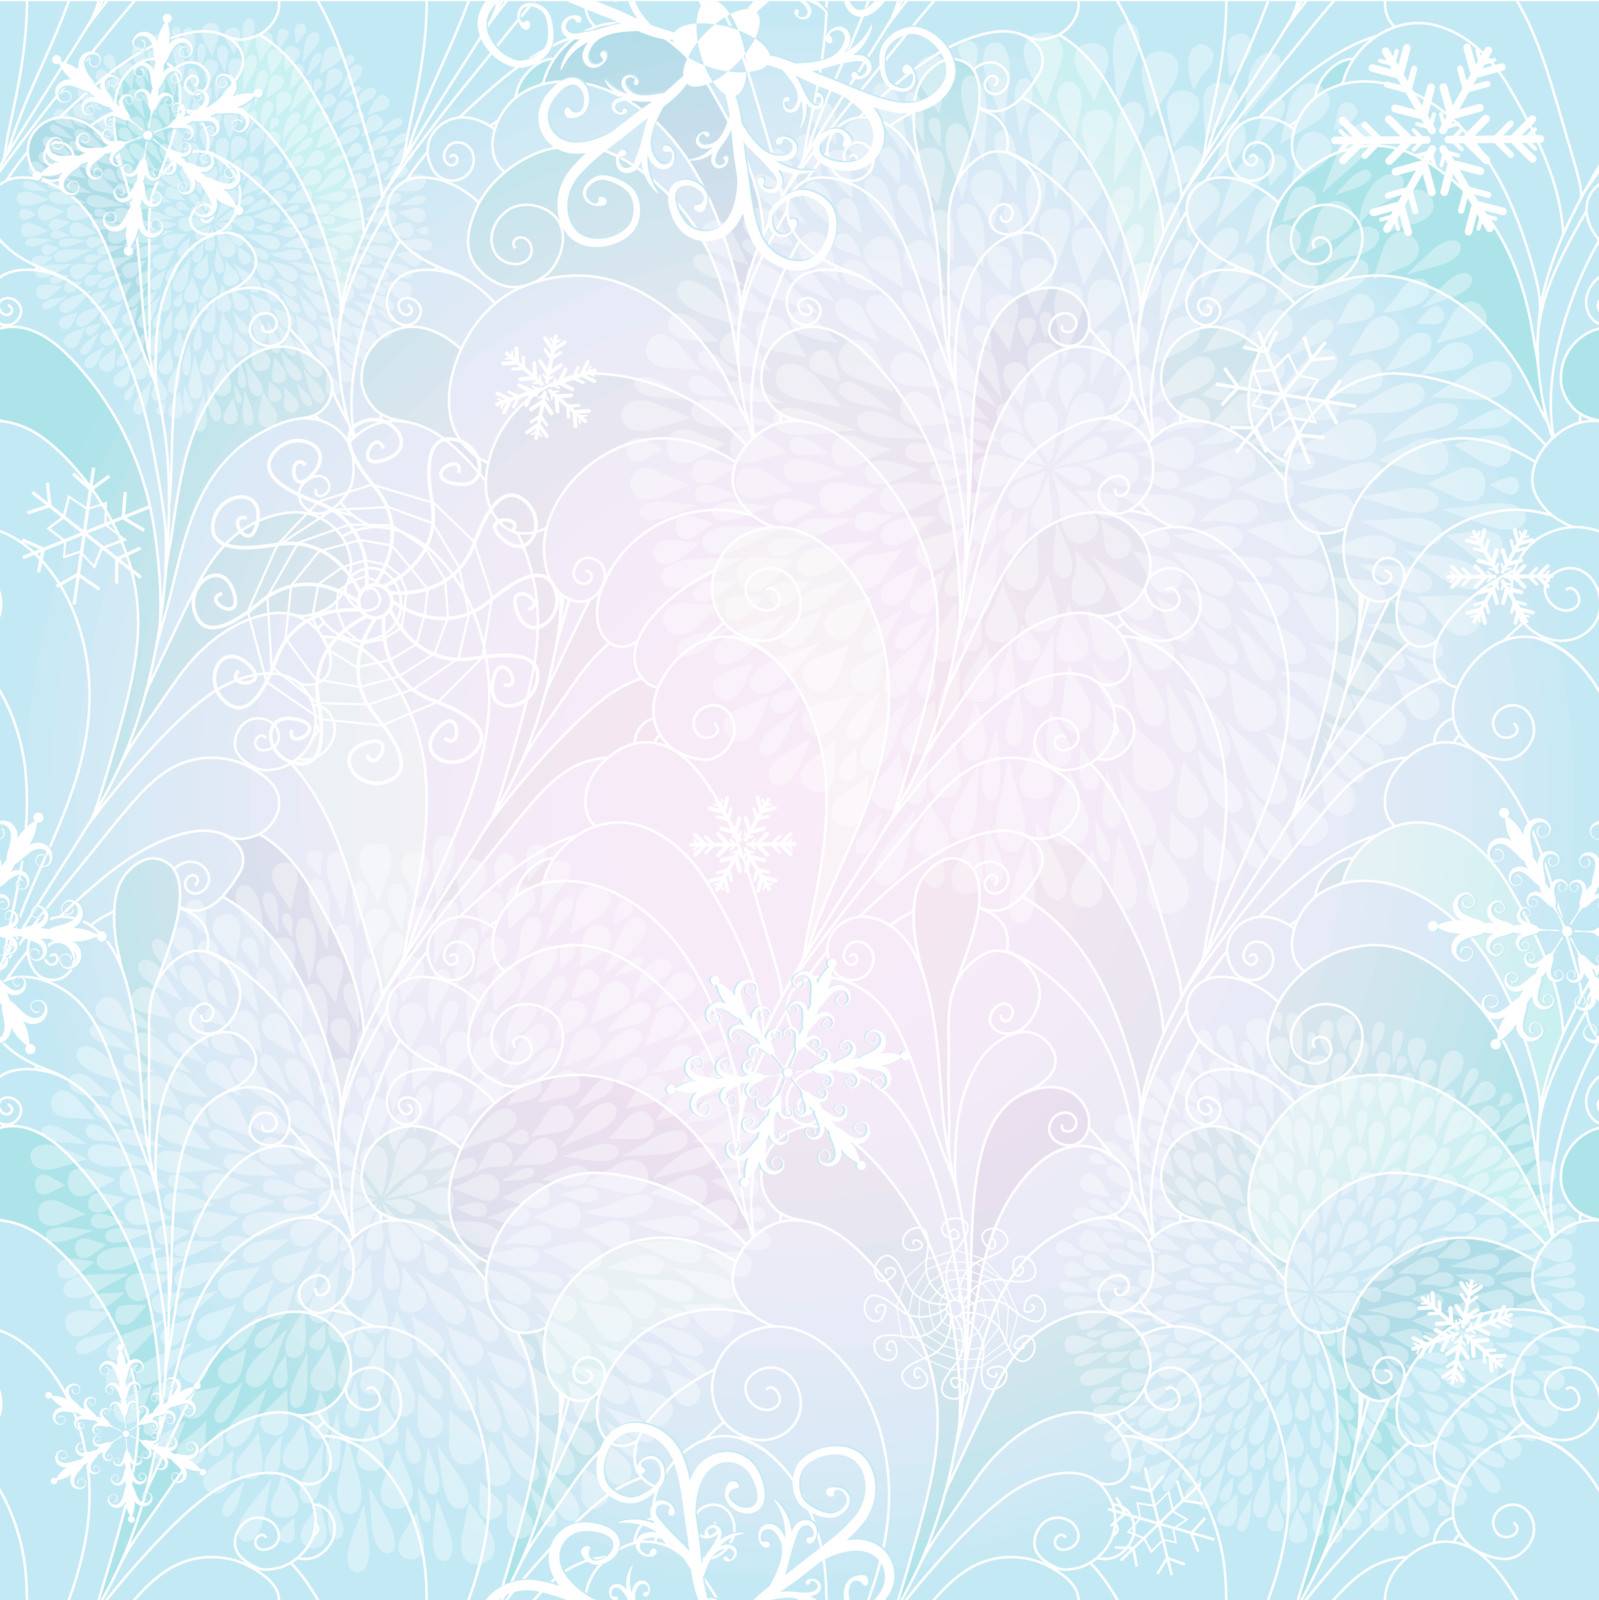 Seamless blue-white christmas pattern with chaotic snowflakes and fireworks (vector EPS 10)